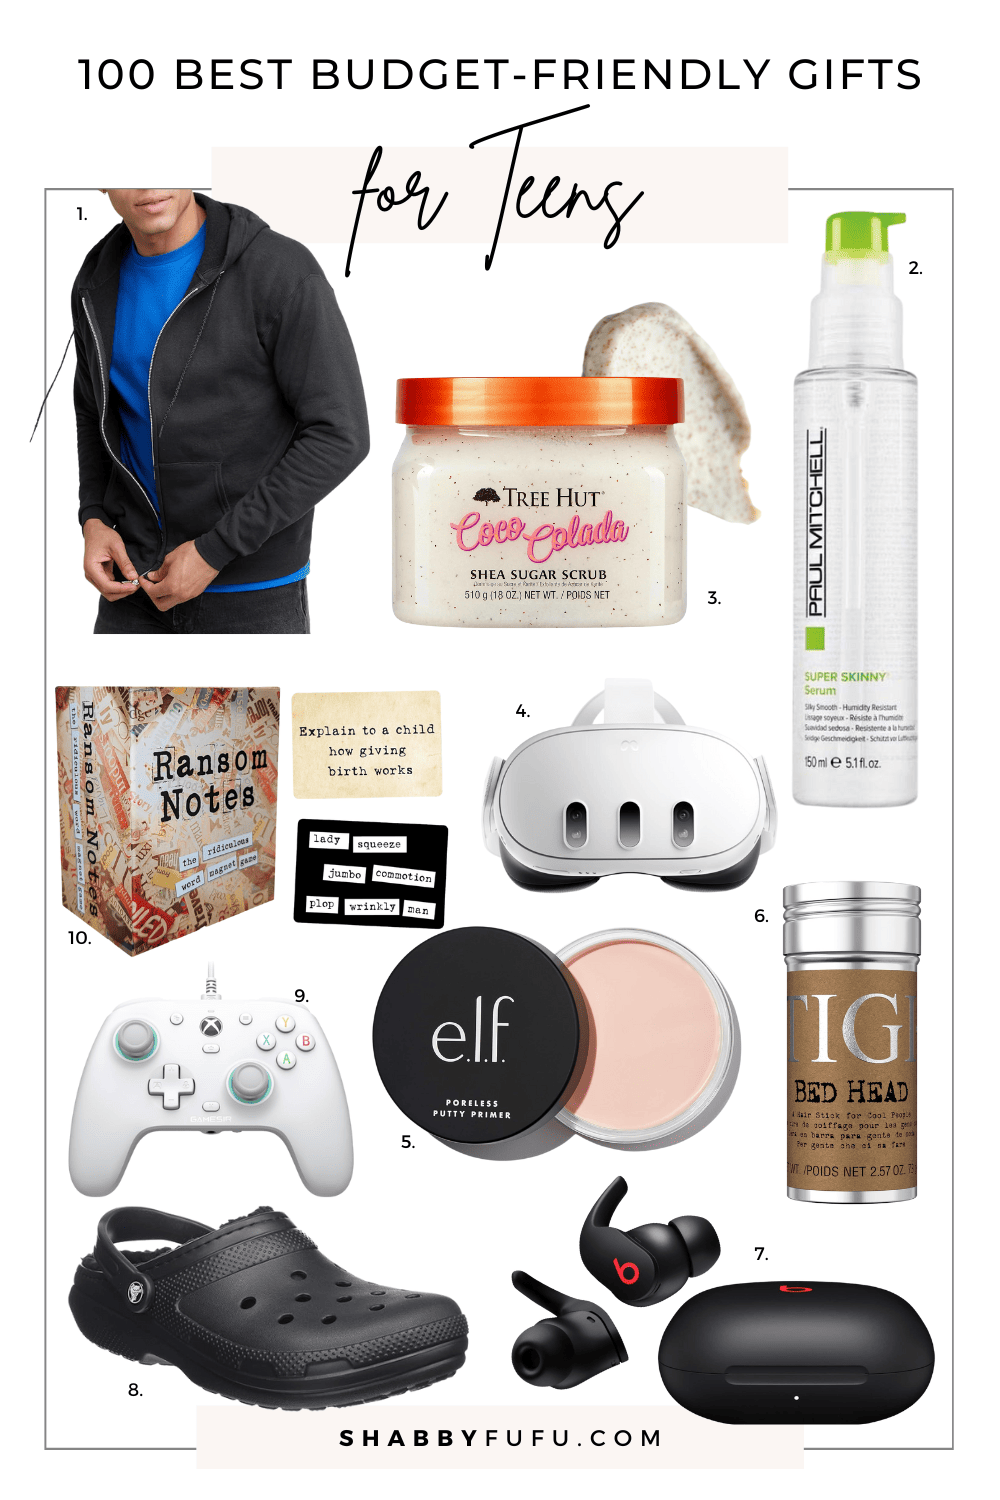 Collage image featuring different products titled "100 Best Budget Friendly Holiday Gifts For Teens"